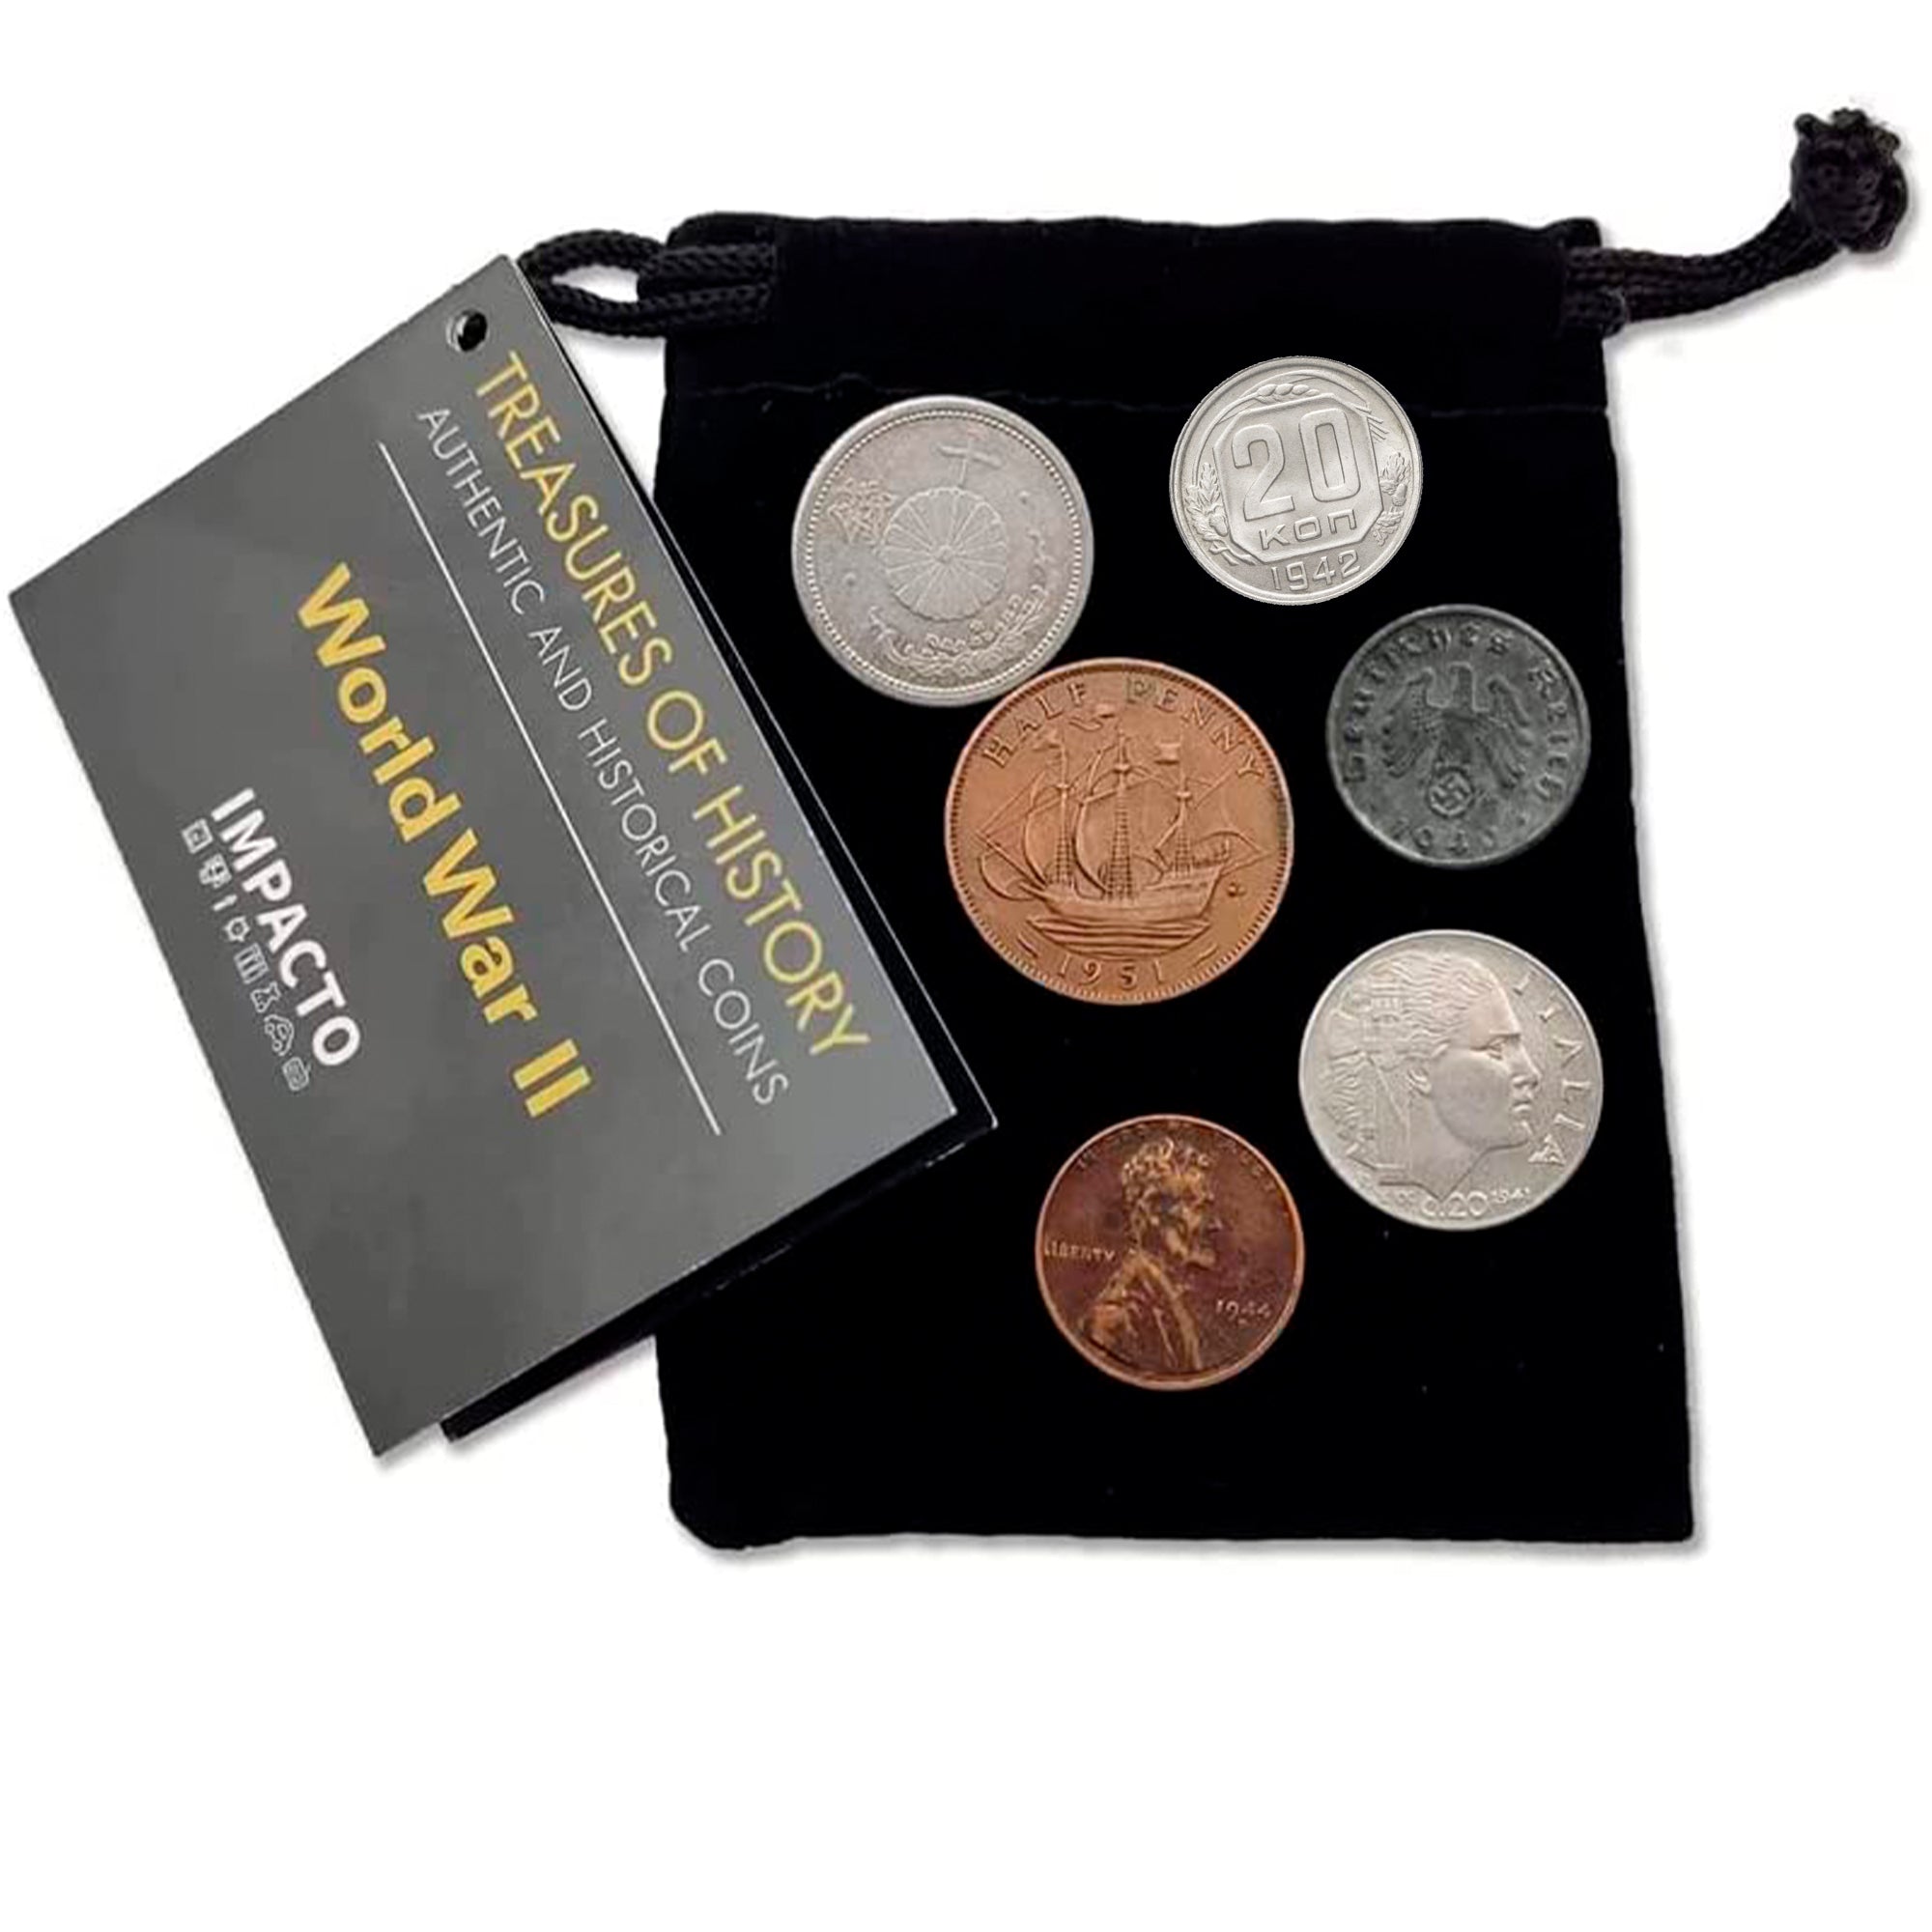 WW2 World Currency - 6 Coins Used During The World War 2 by Allies & Axis (1939-1945). Special WW2 Memorabilia for Collector. Presented in a Velvet Bag. Certificate of Authenticity Included.